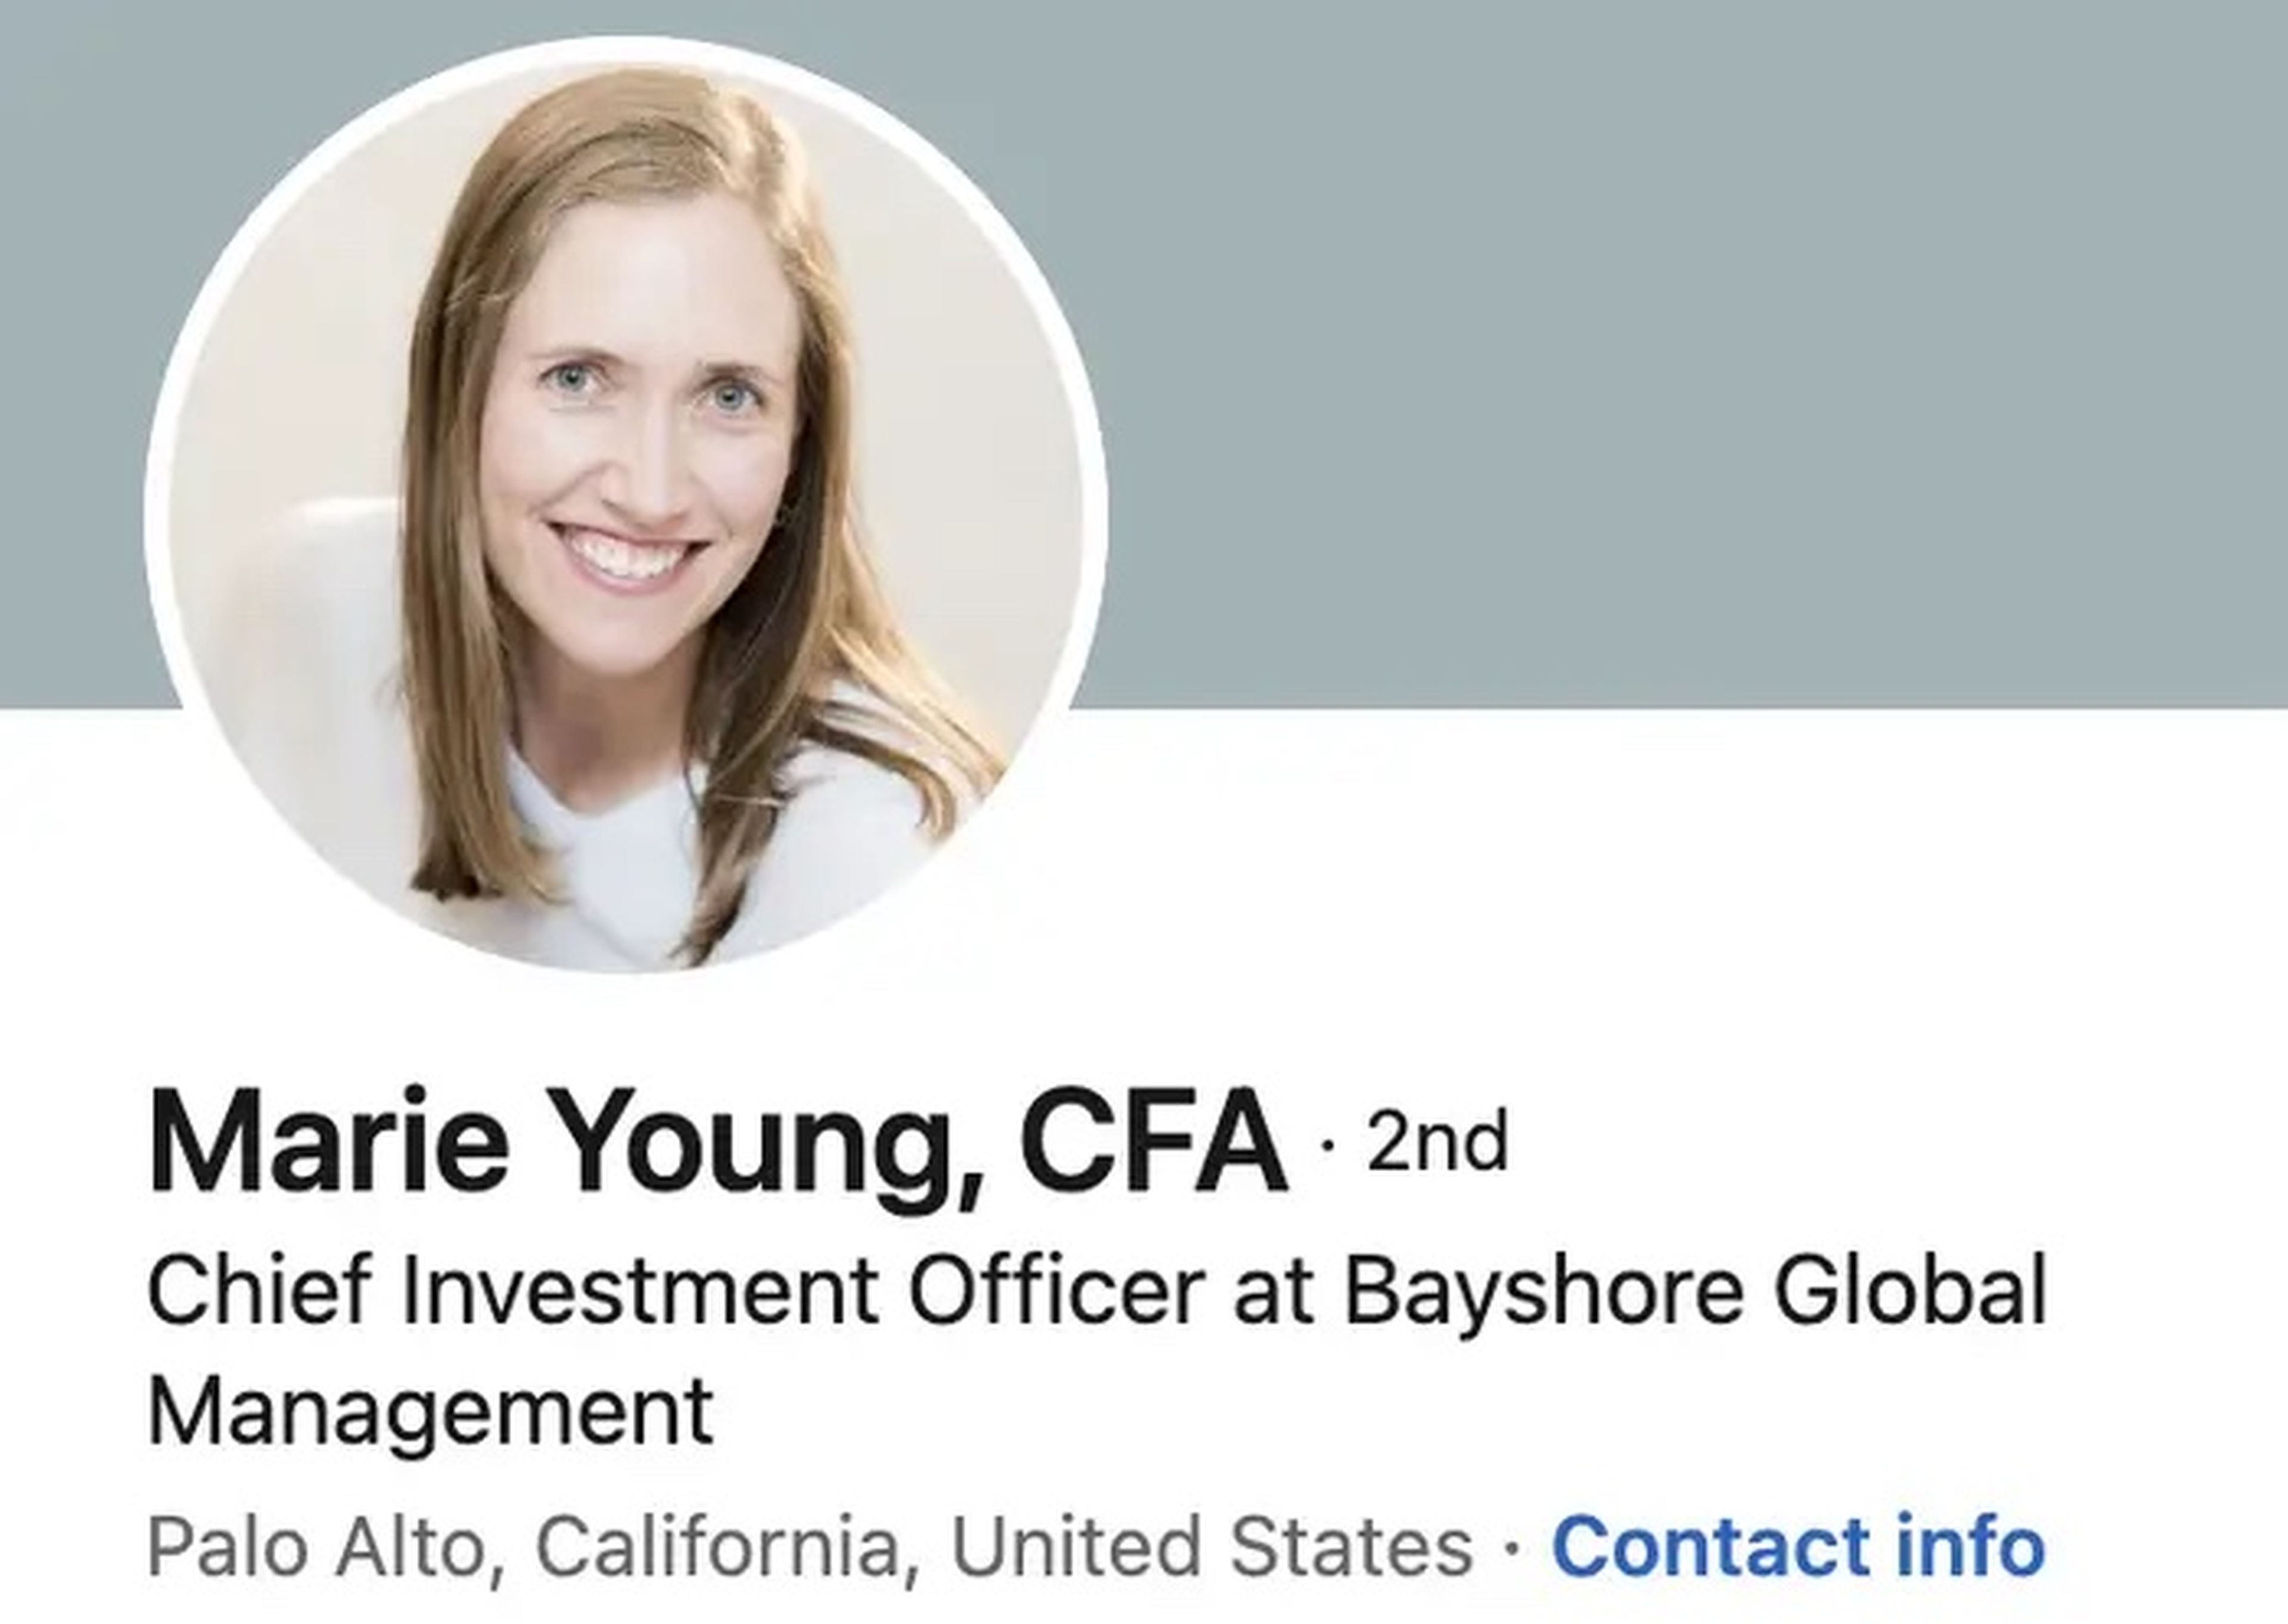 Marie Young, Bayshore Global Management